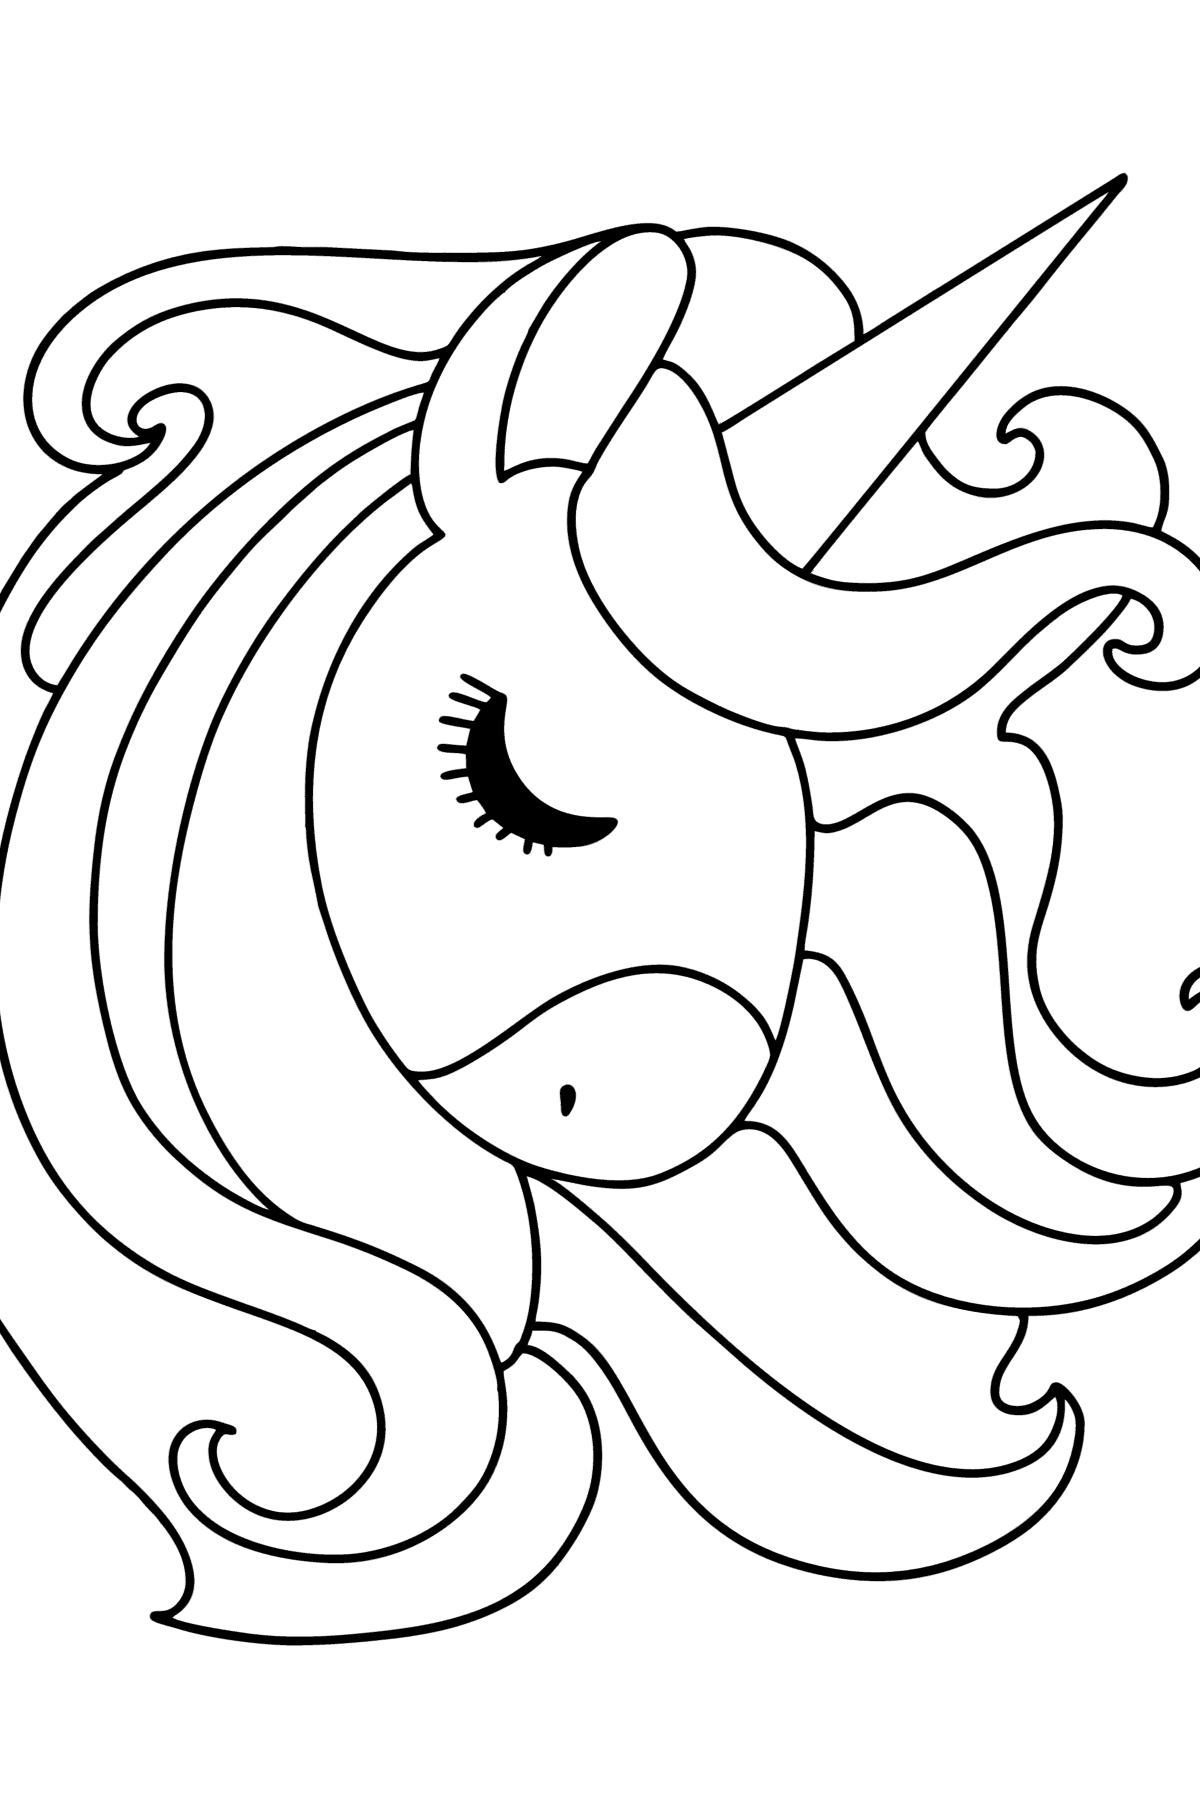 Unicorn head for kids coloring page - Coloring Pages for Kids